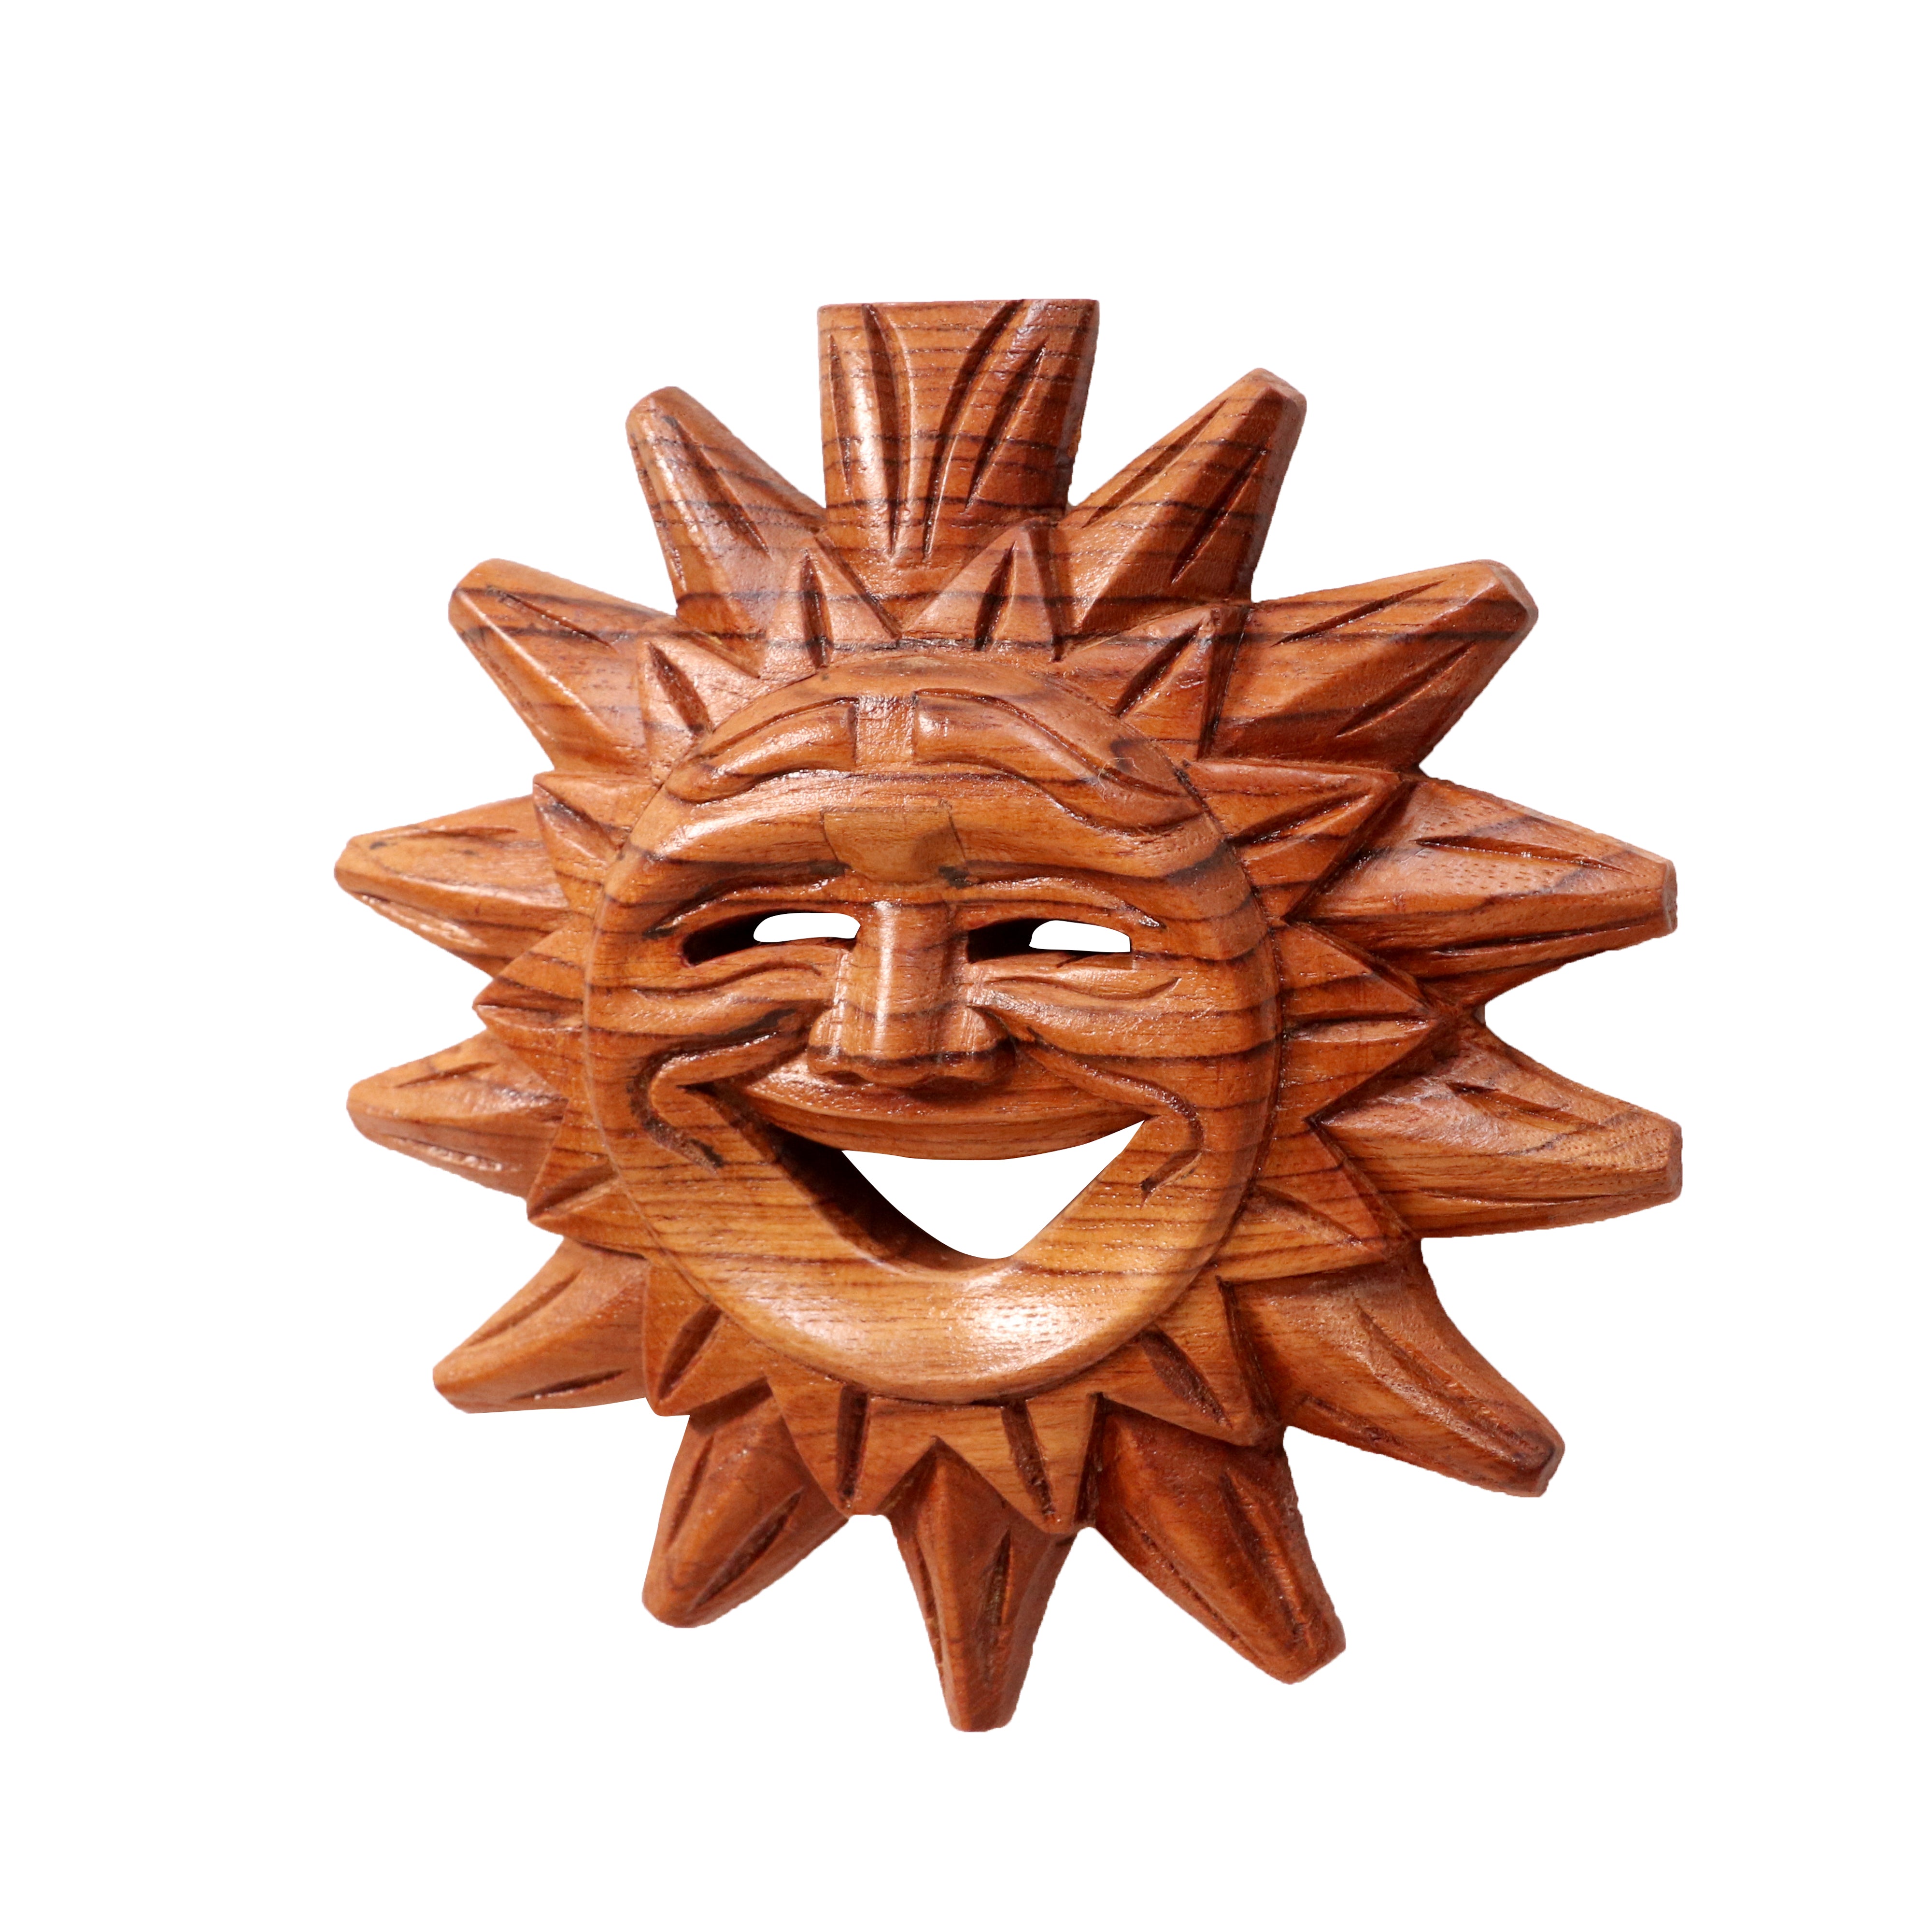 Southern Smiling Sun Style Handmade Antique Wooden Wall Decor for Home Wall Decor